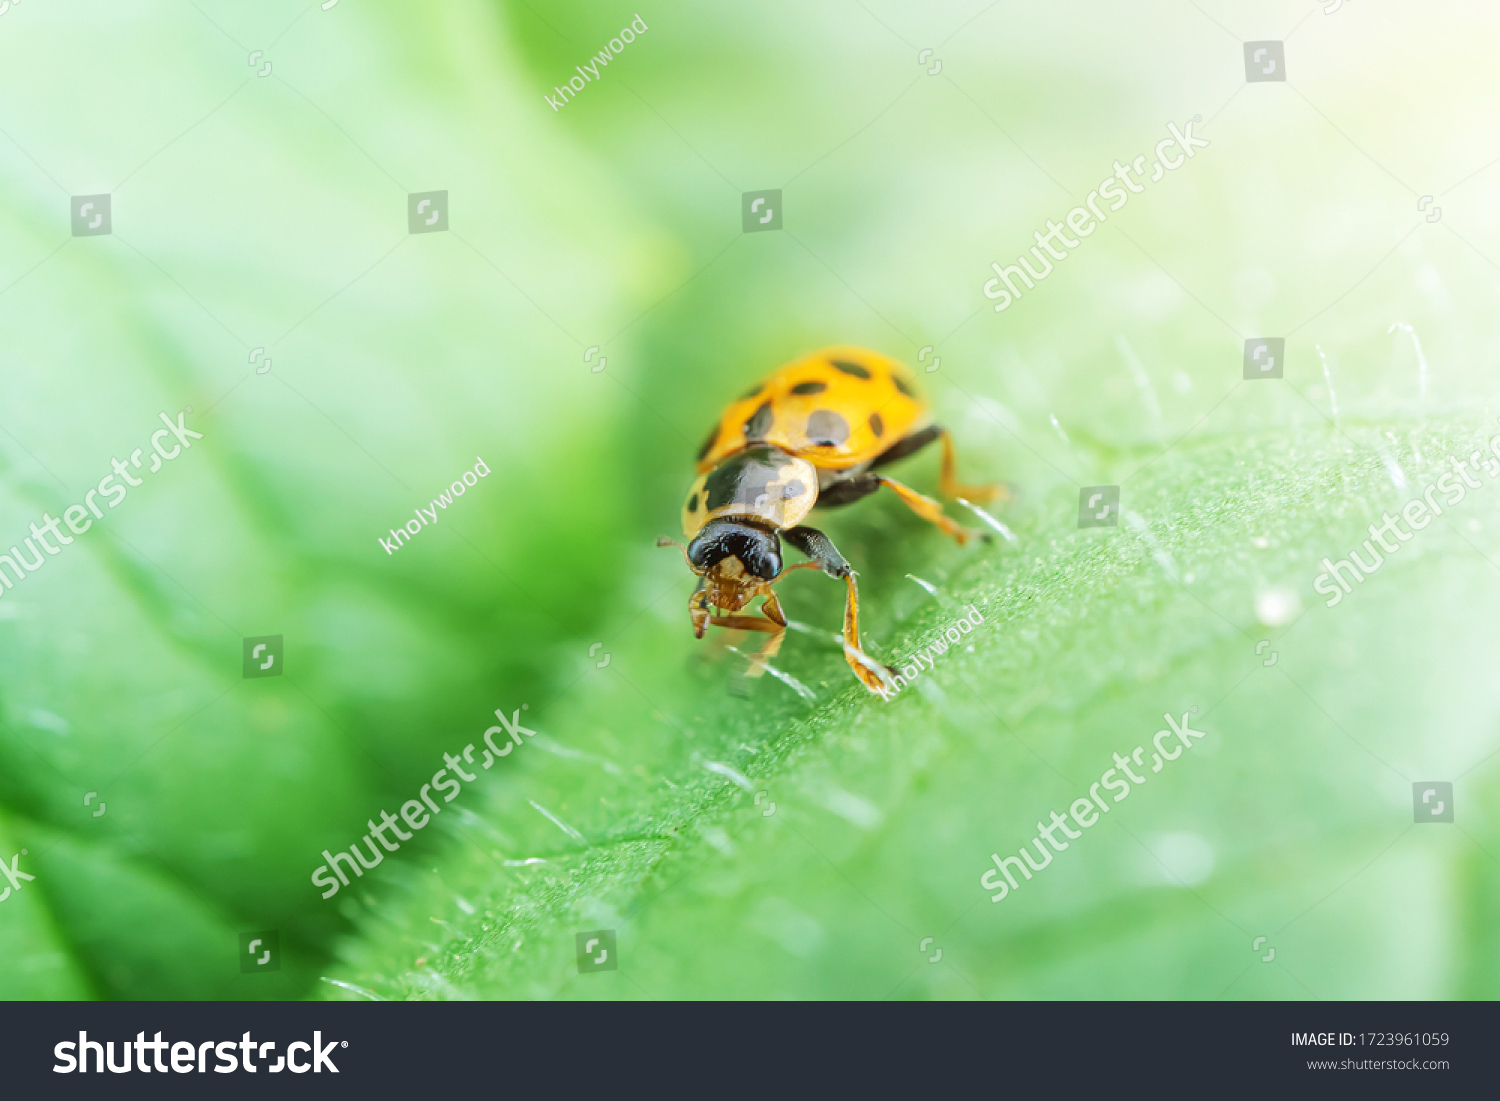 Ladybug on a green plant. The concept of nature, spring, summer. Environment Day. Macro photo. Copyspace. #1723961059